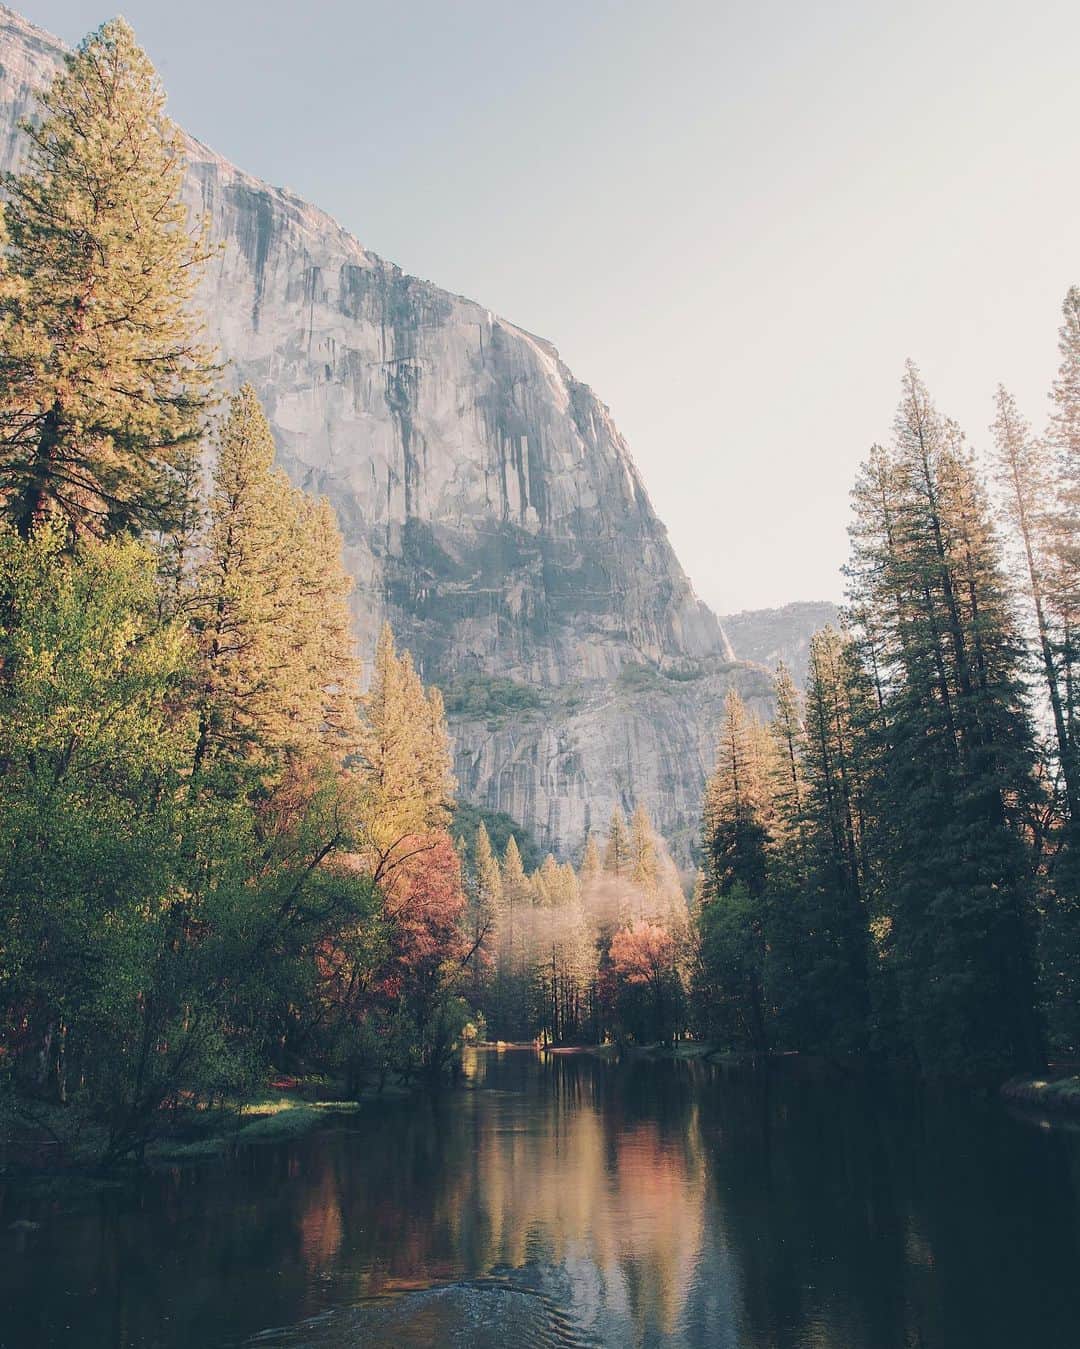 Kyle Kuiperのインスタグラム：「Early morning on the Merced River (Fall 2018) 🍂🏞」